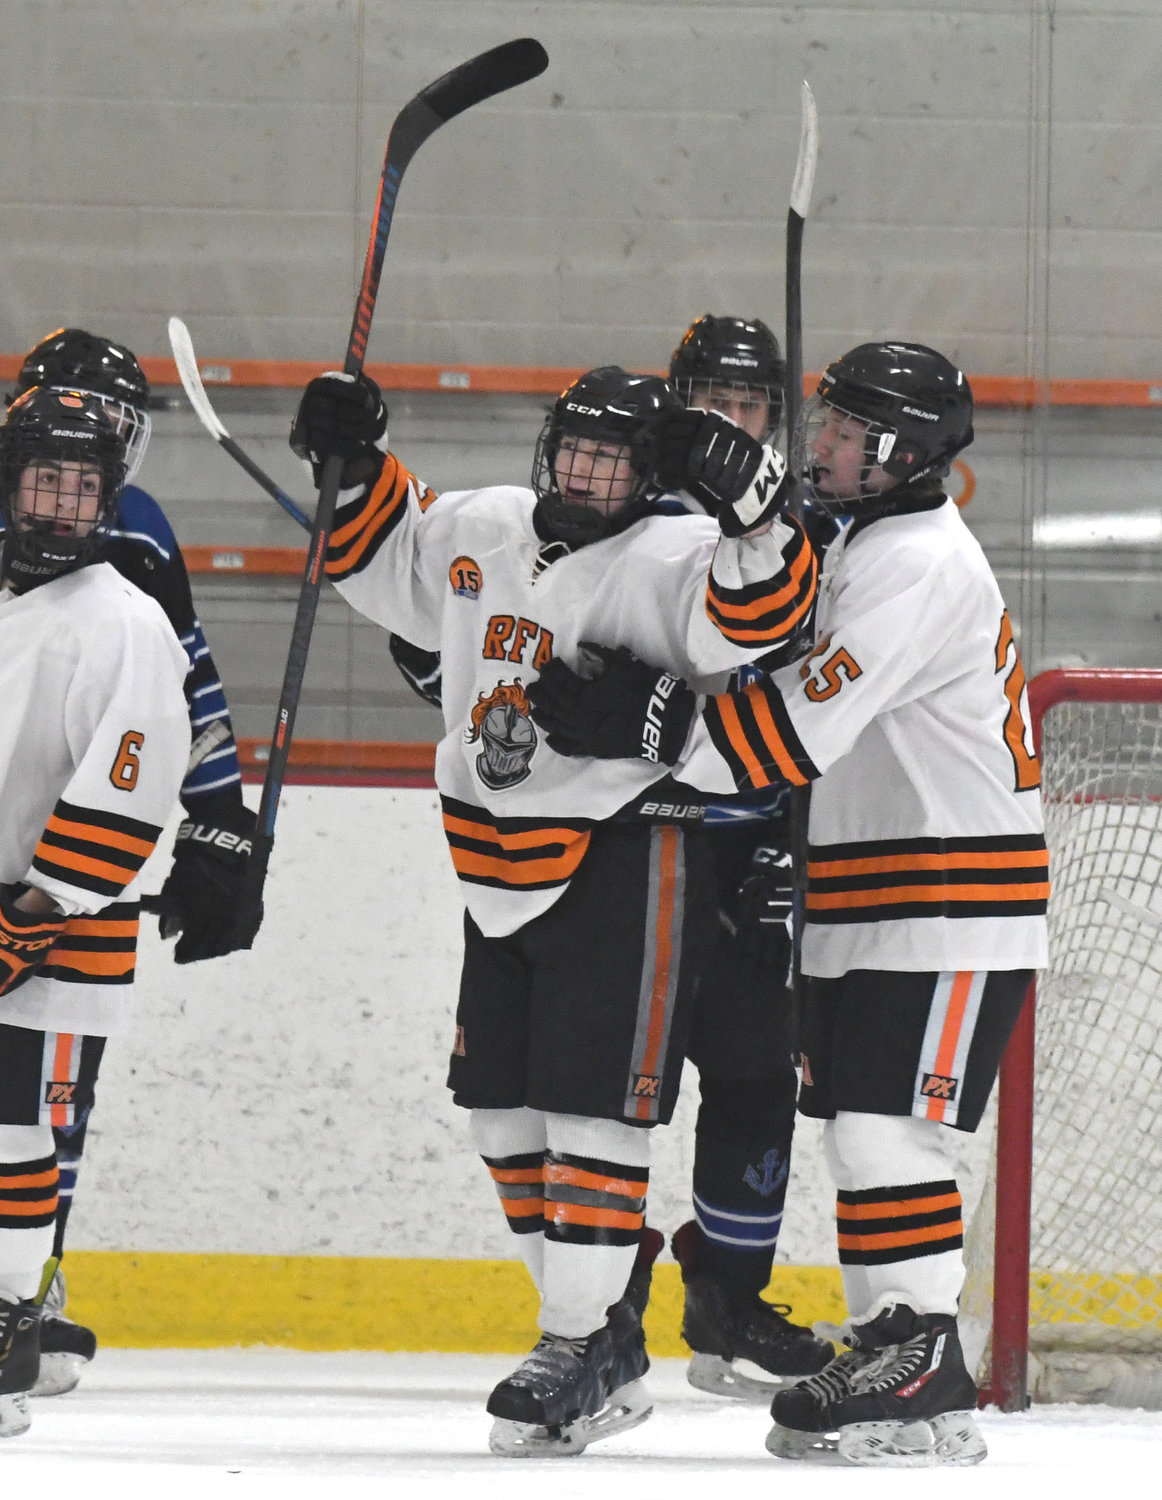 RFA #27 reacts to scoring the first goal of the game.